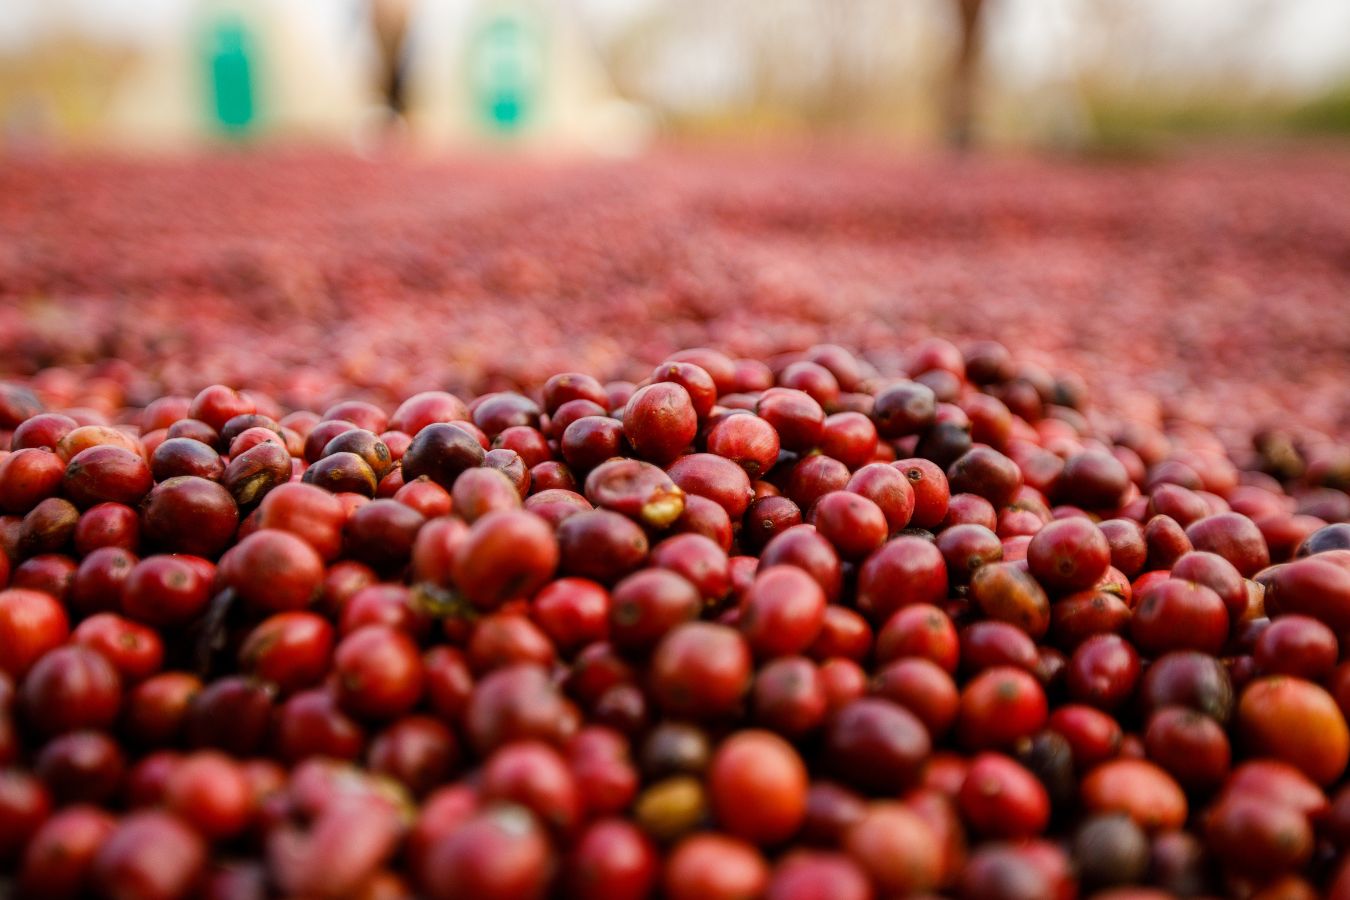 Coffee price today September 21, 2022: